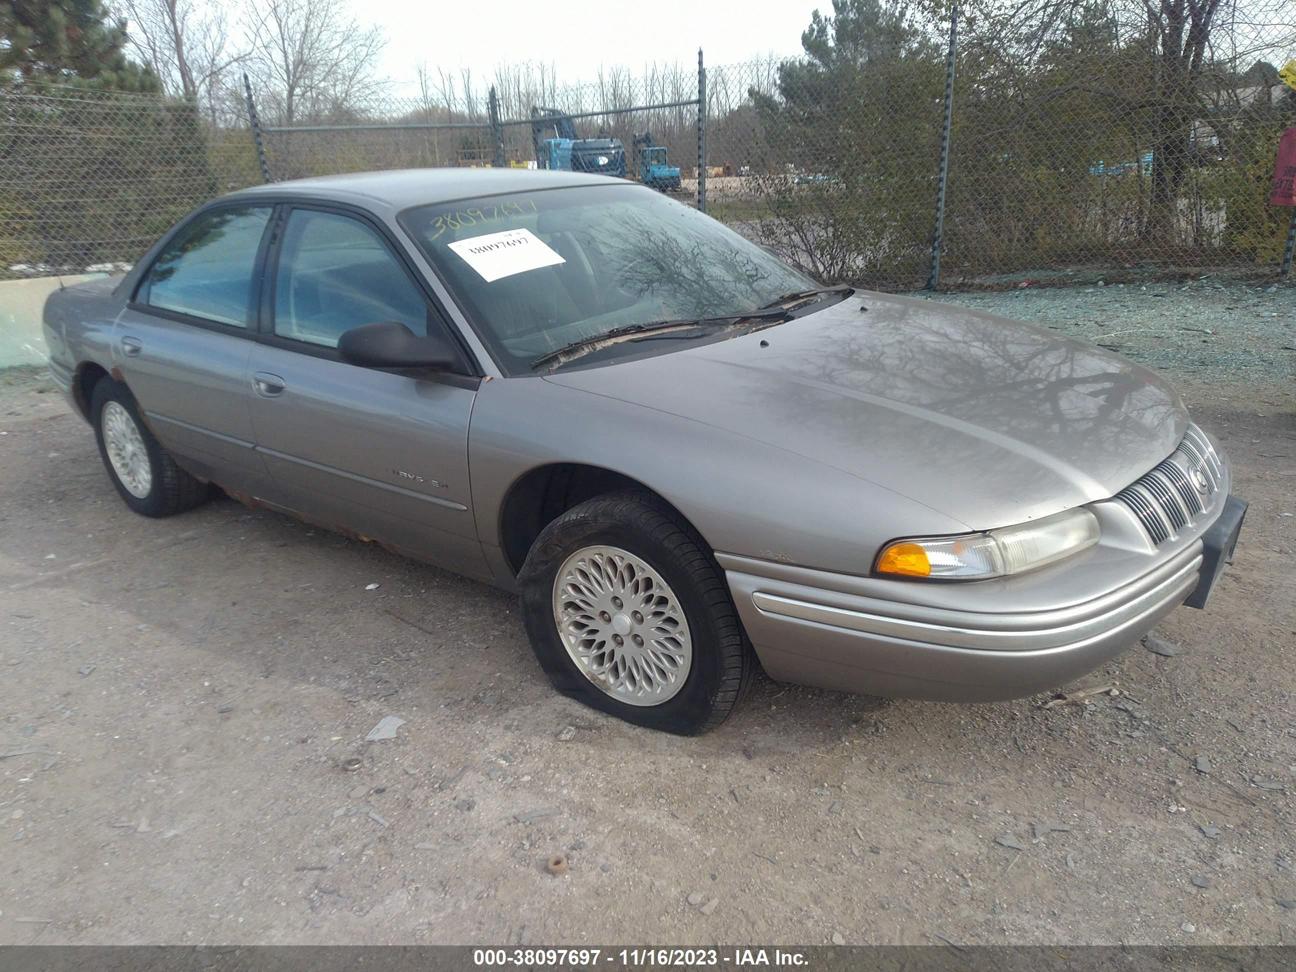 vin: 2C3HD56F8VH740595 2C3HD56F8VH740595 1997 chrysler concorde 3500 for Sale in 53089, N70 W25277 Indian Grass Lane, Sussex, Wisconsin, USA